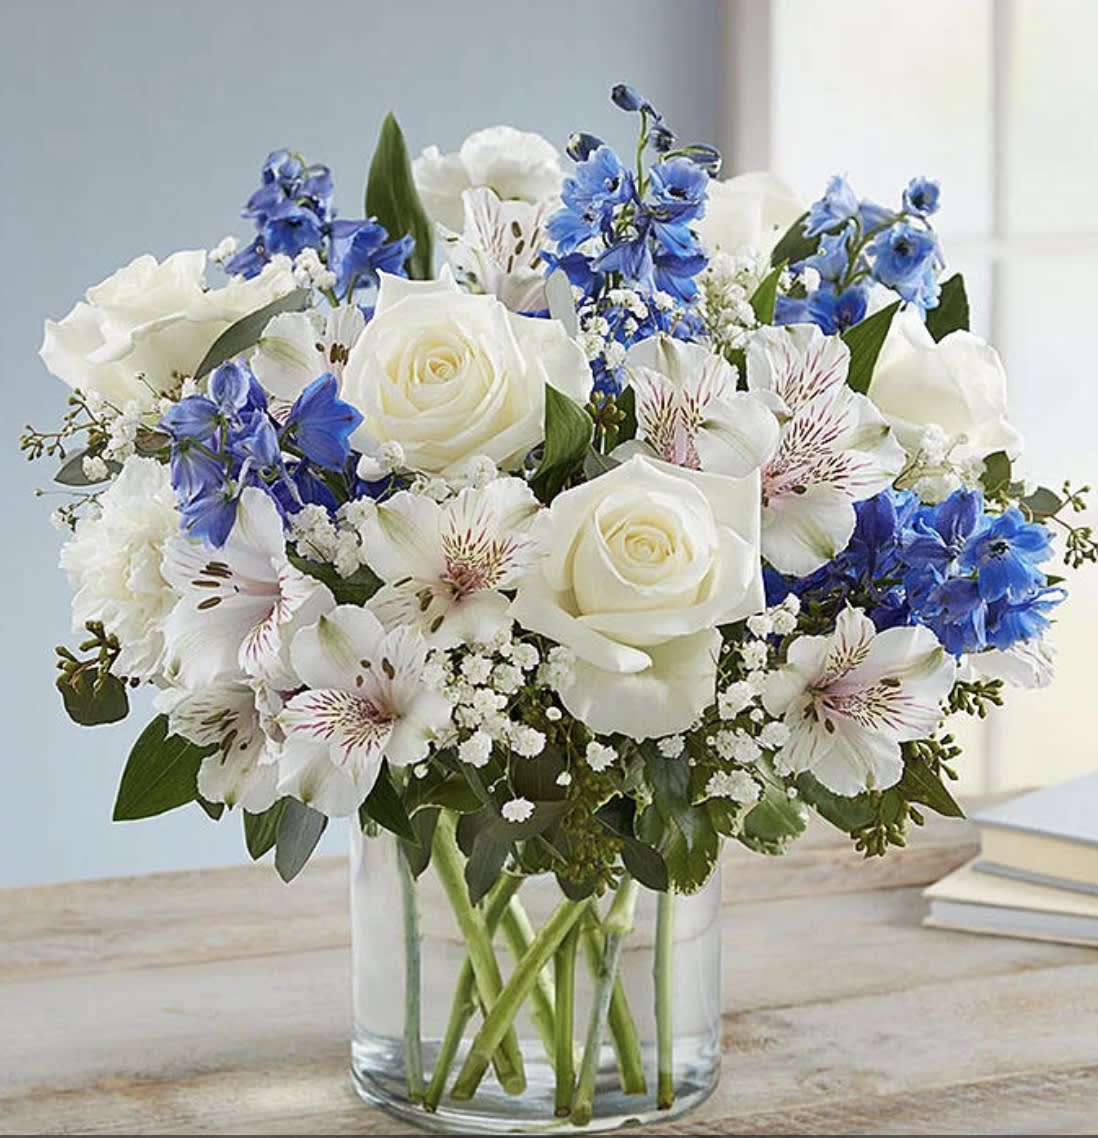 Wonderful Wishes - Our bouquet of blue and white expresses to those who mean the most. It’s a gift that won’t leave them wondering how much you care. 